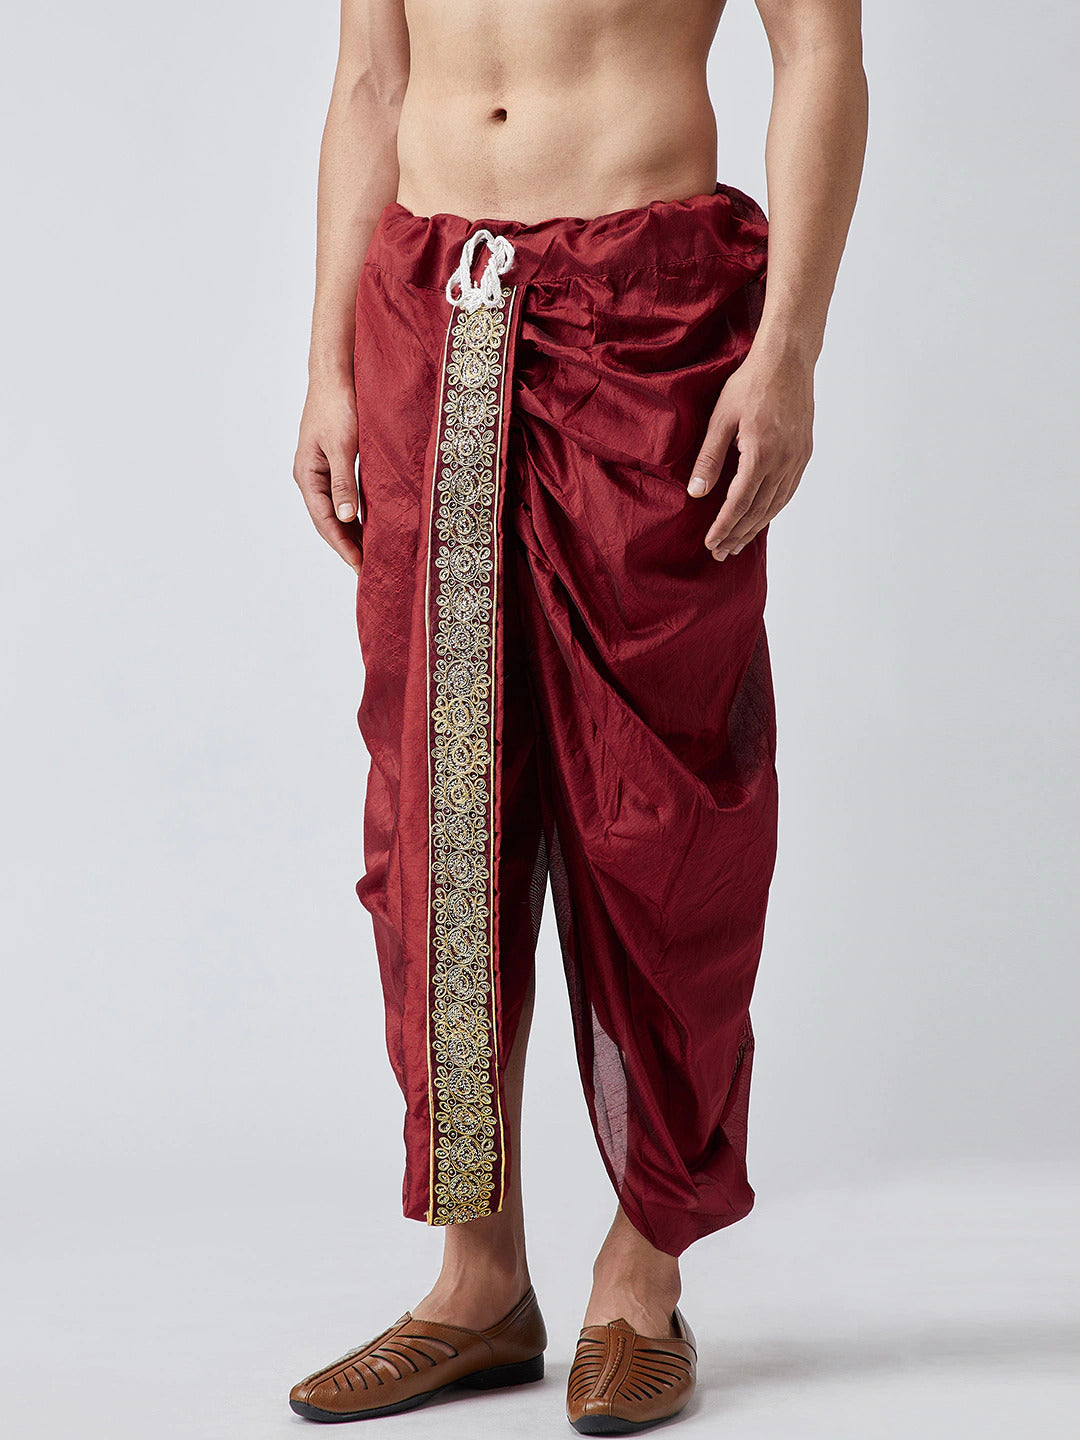 maroon Embroidered Dhoti Pants Indian Clothing in Denver, CO, Aurora, CO, Boulder, CO, Fort Collins, CO, Colorado Springs, CO, Parker, CO, Highlands Ranch, CO, Cherry Creek, CO, Centennial, CO, and Longmont, CO. NATIONWIDE SHIPPING USA- India Fashion X